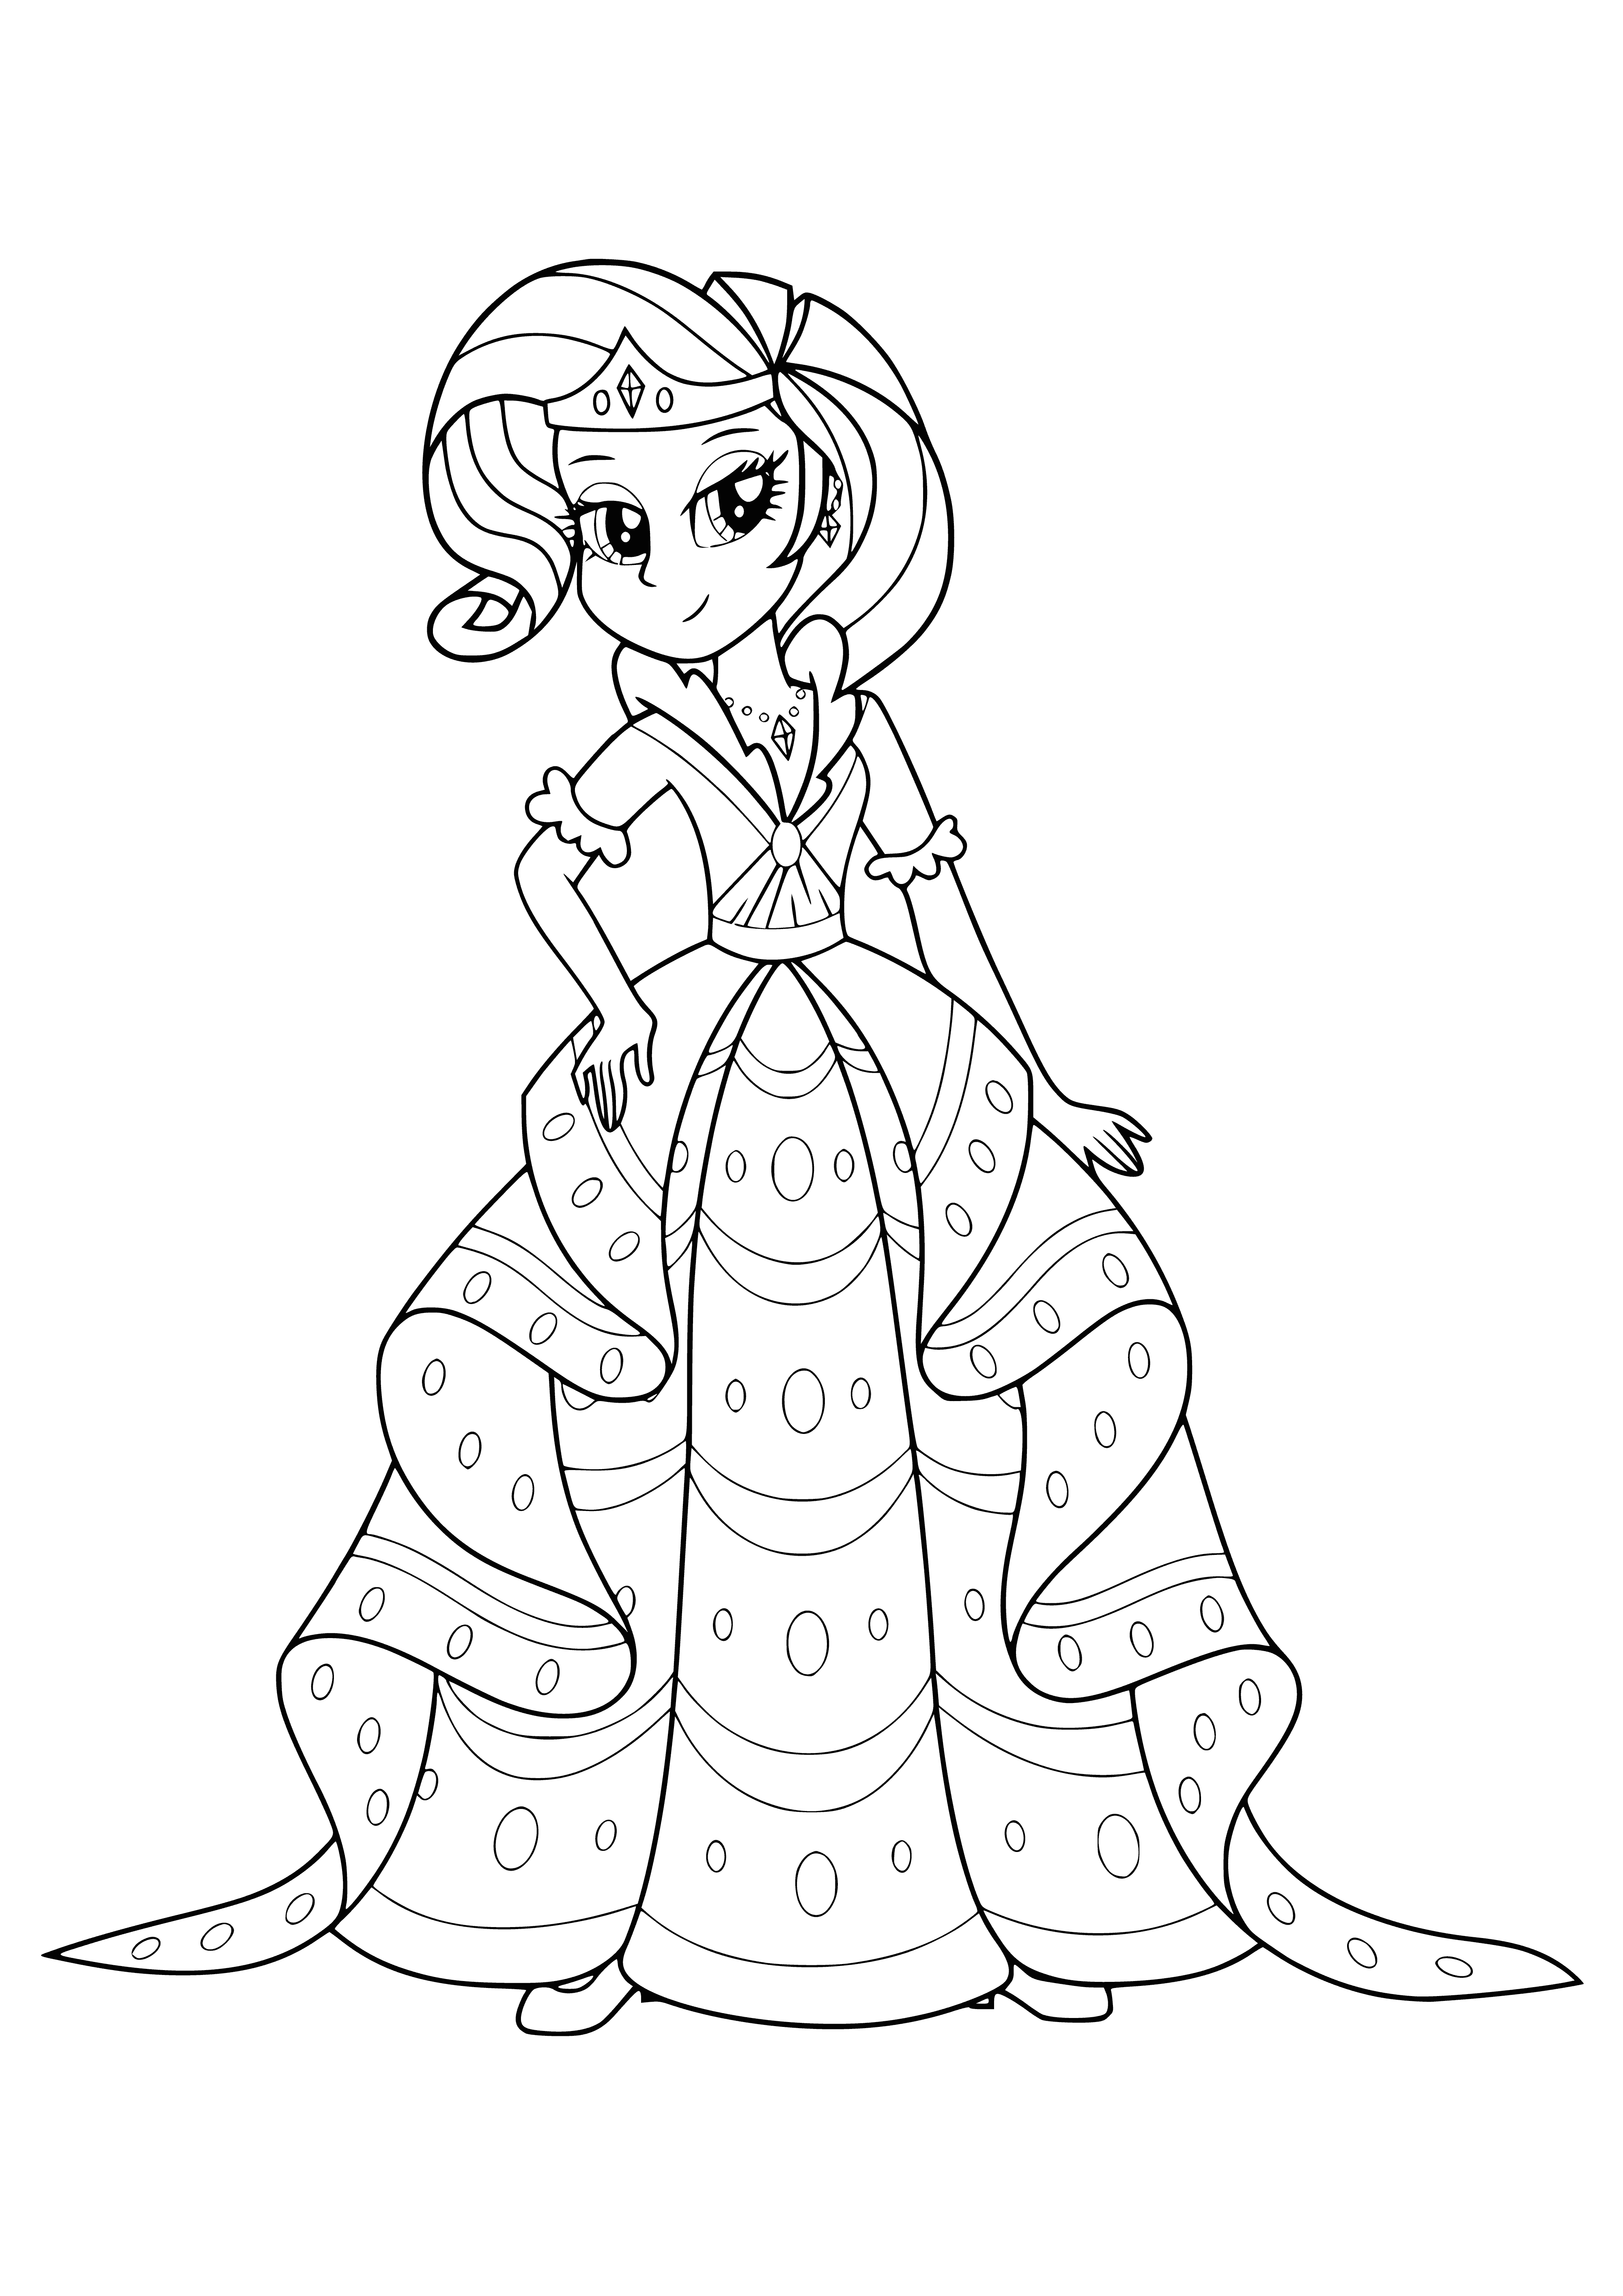 coloring page: White girl with blue eyes, long curly hair with pink streak, wearing a white/pink outfit and holding a pink purse.